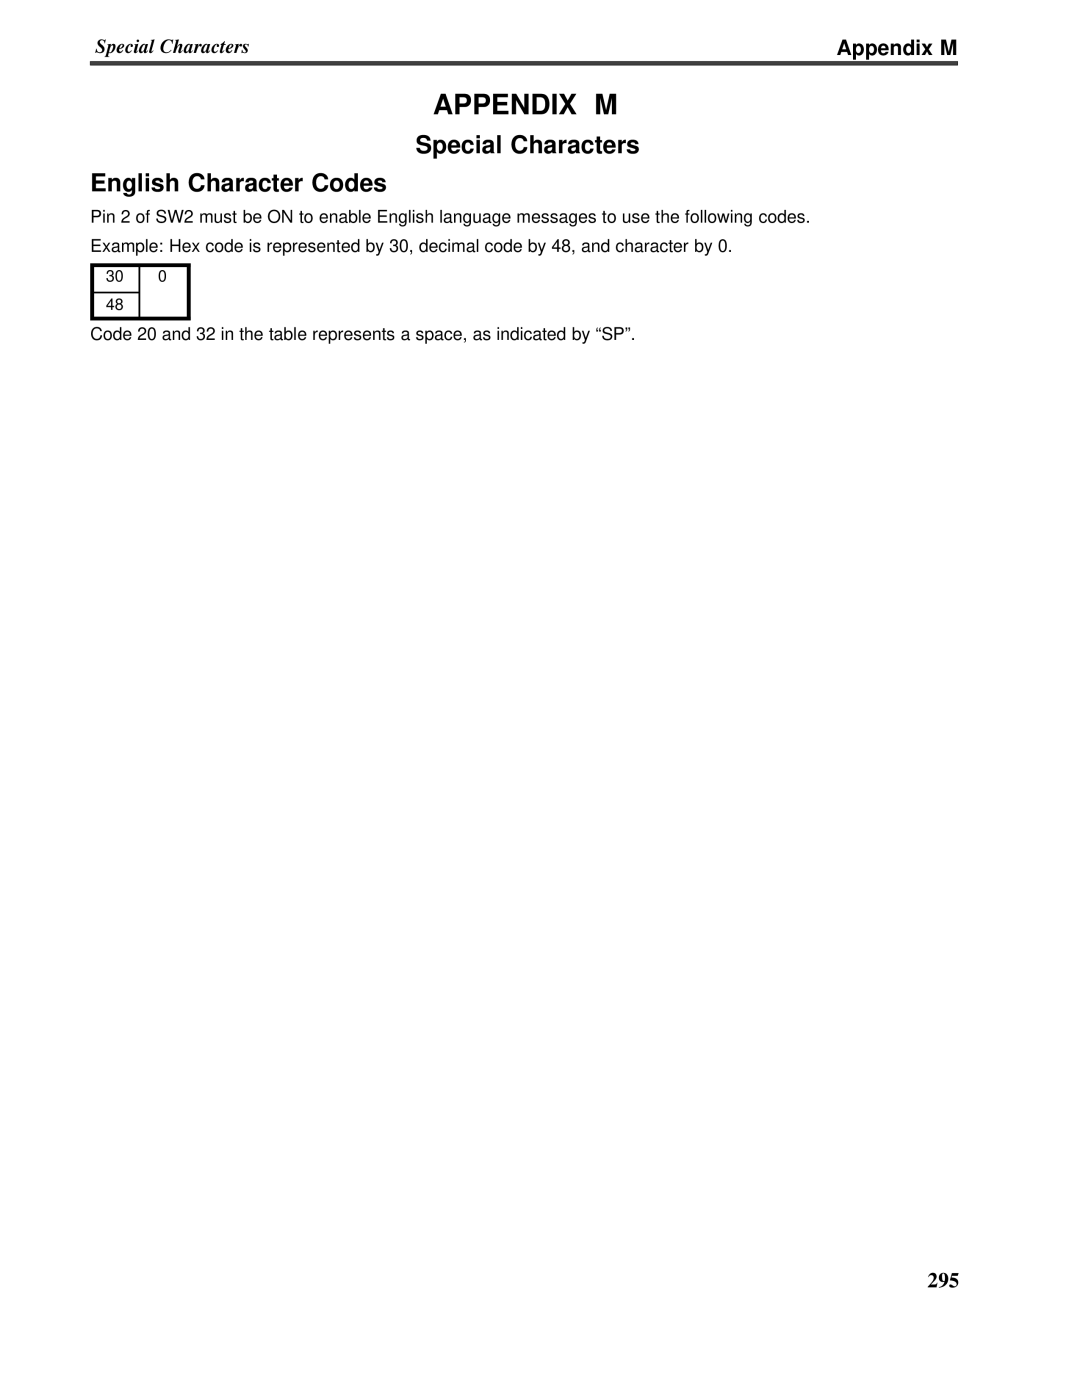 Omron V022-E3-1 operation manual Appendix M, Special Characters English Character Codes 